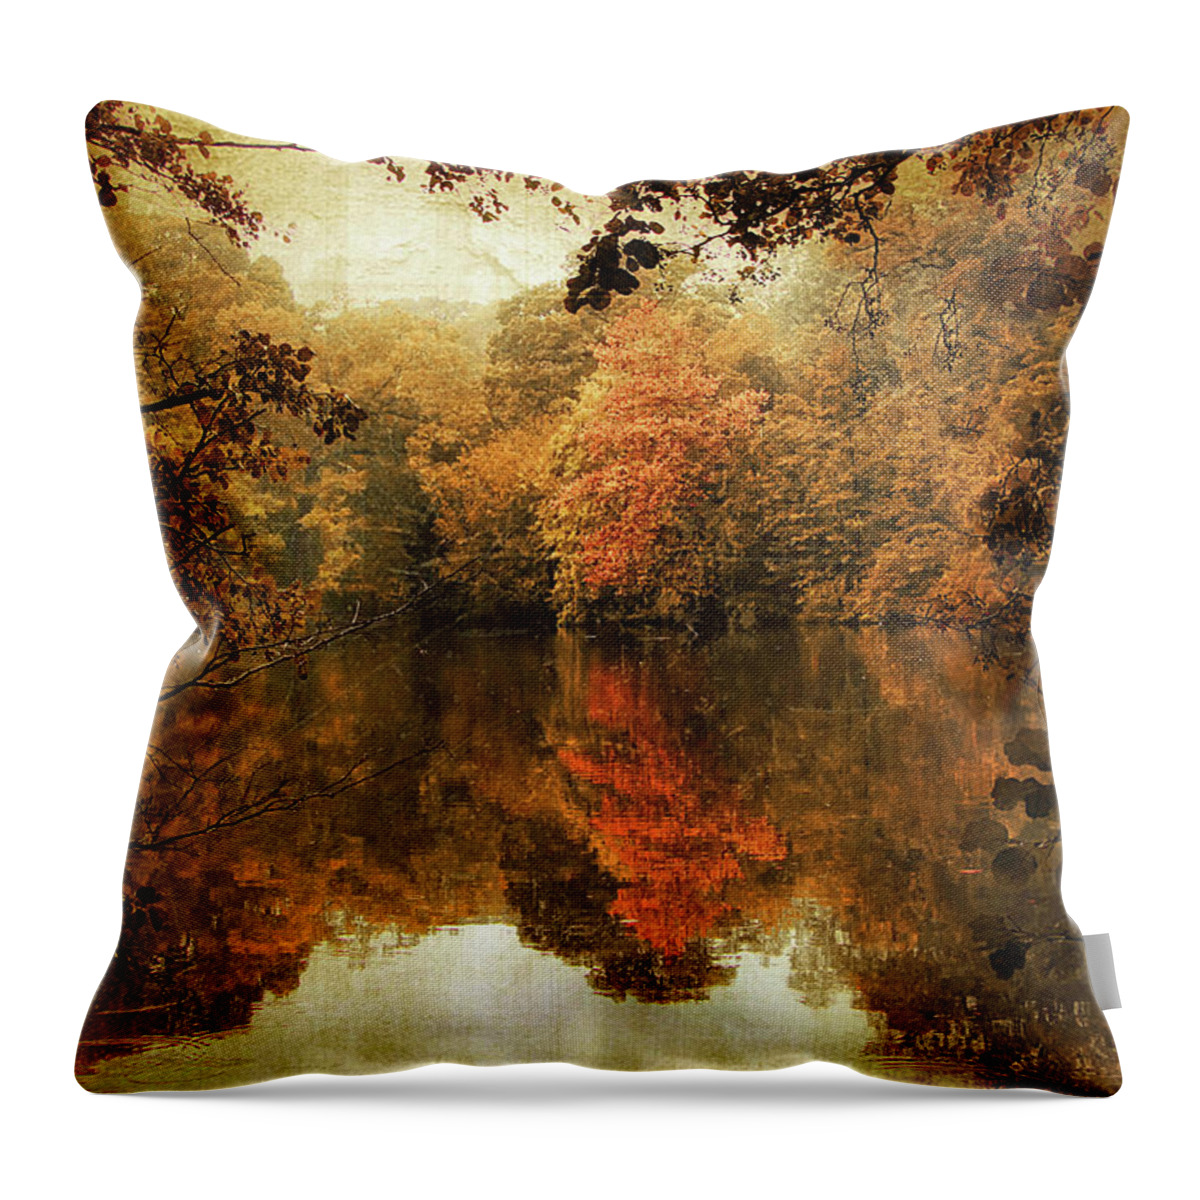 Autumn Throw Pillow featuring the photograph Autumn Reflected by Jessica Jenney